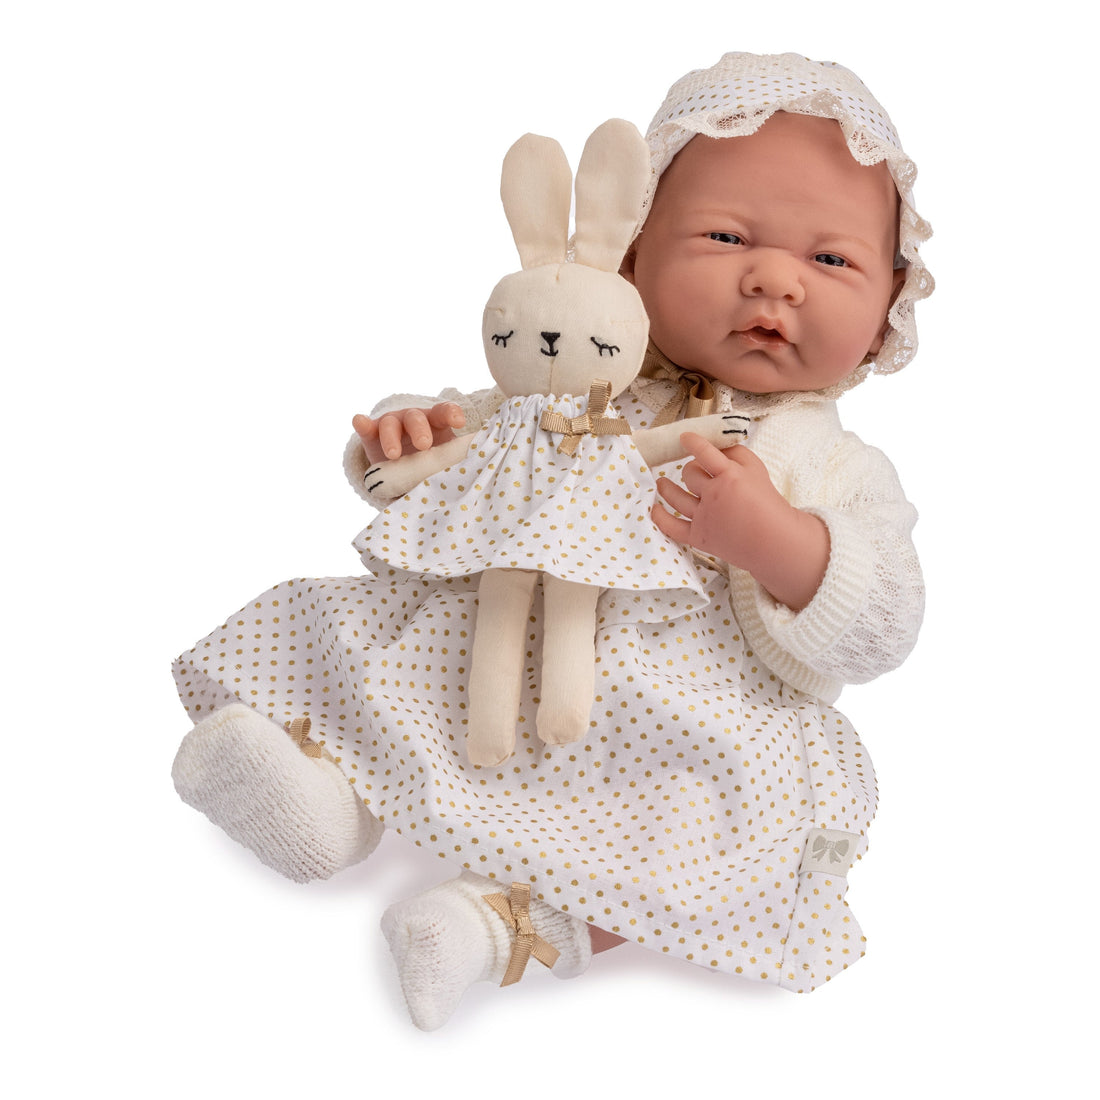 Soft Body La Newborn in Deluxe Royal Themed Outfit w/ Accessories - Dolls and Accessories